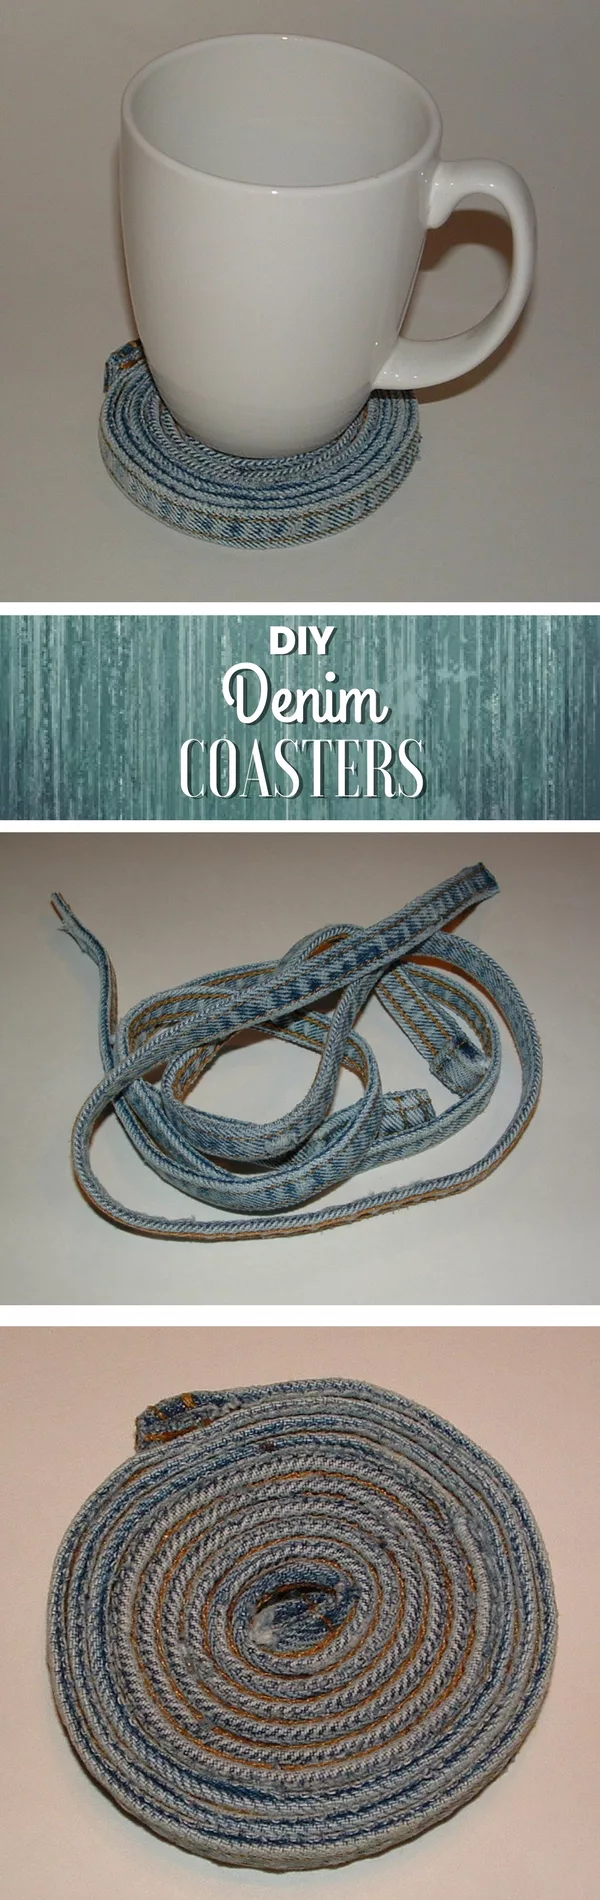 Check out how to make a decorative DIY coaster from reclaimed jeans 